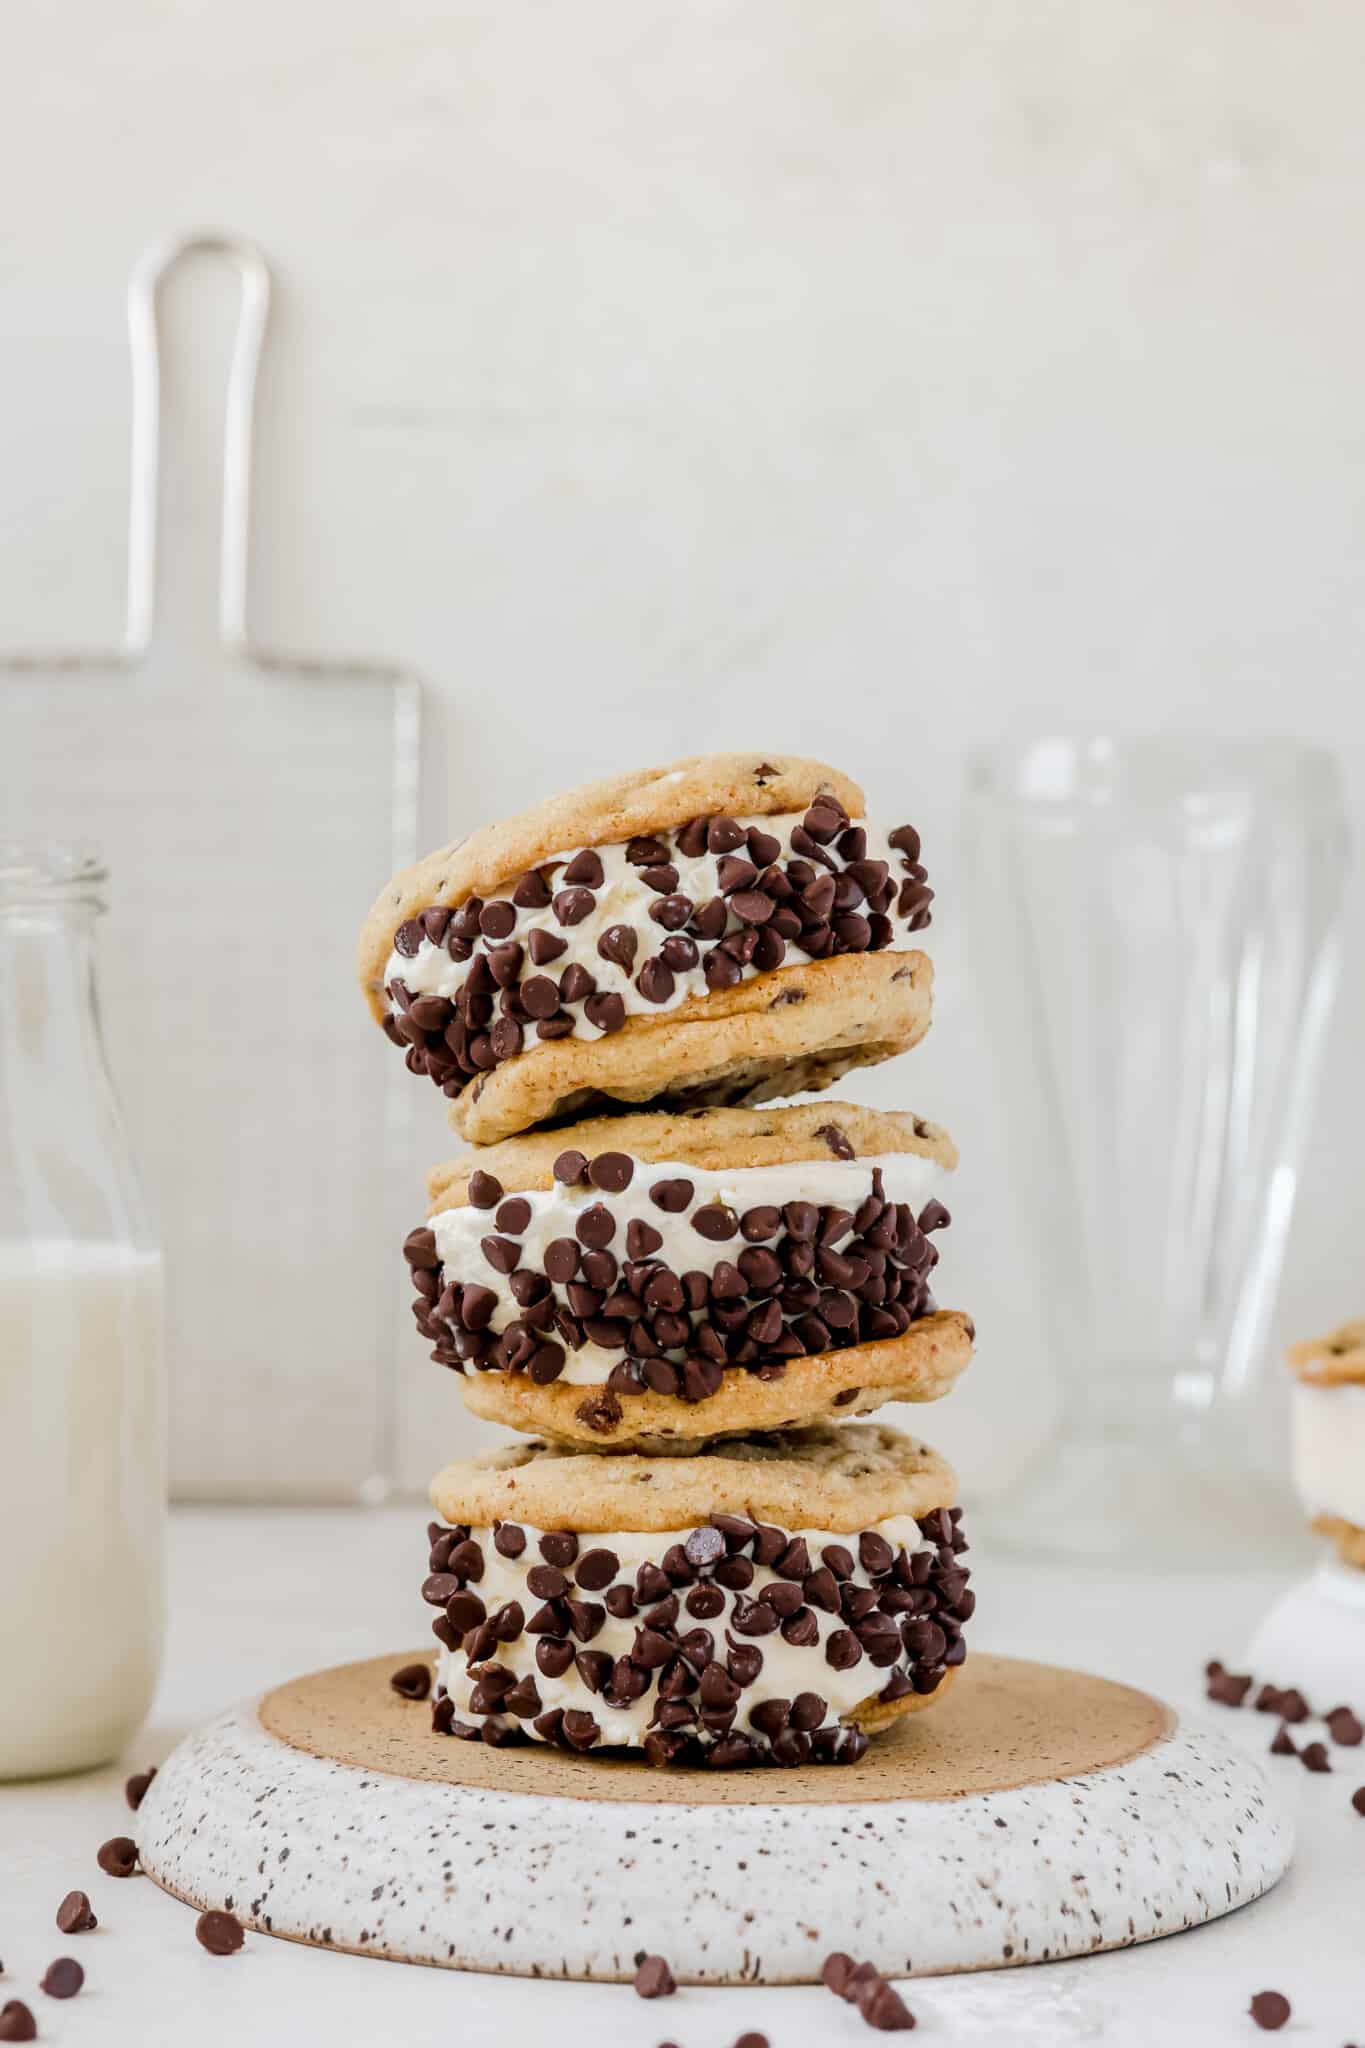 The Homemade Chipwich: Chocolate Chip Cookie Ice Cream Sandwich